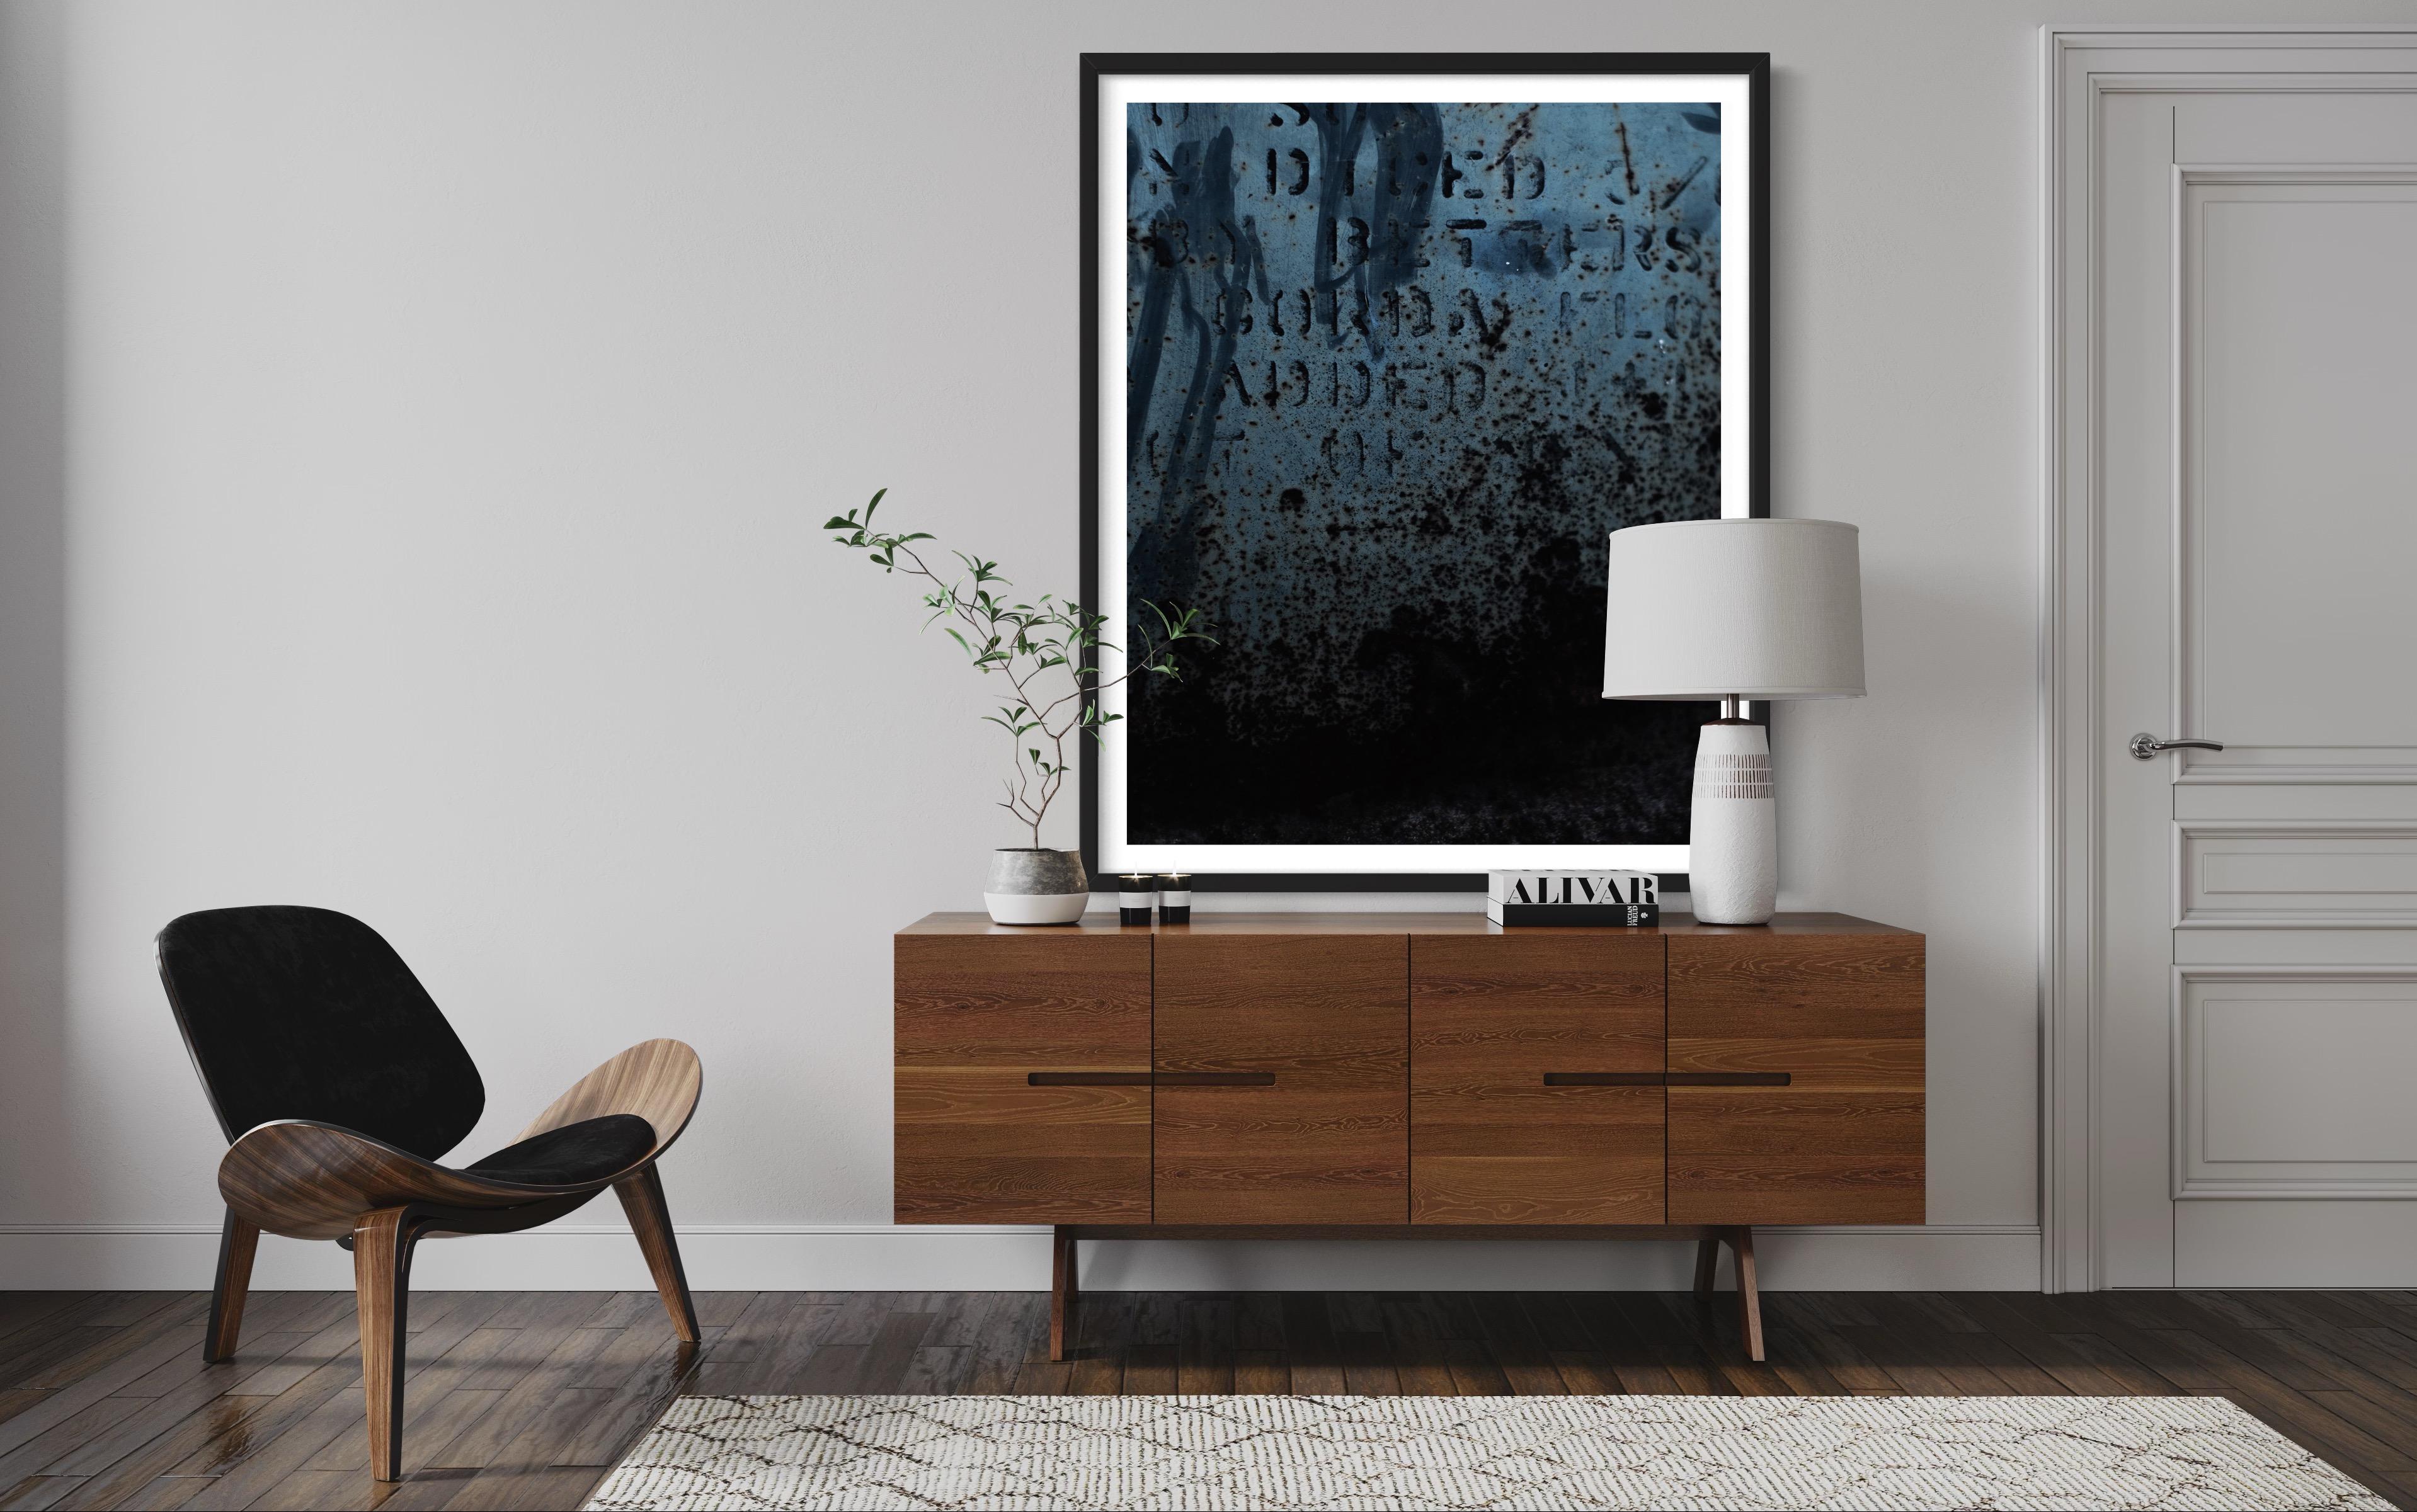 Addisonjones artwork, Smelting Serif contemporary artwork

A R T I S T  S T O R Y:
“As I walked back through the fields of my grandparents' farm before we sold it, a sense of nostalgia washed over me. Memories of my childhood flooded back, reminding